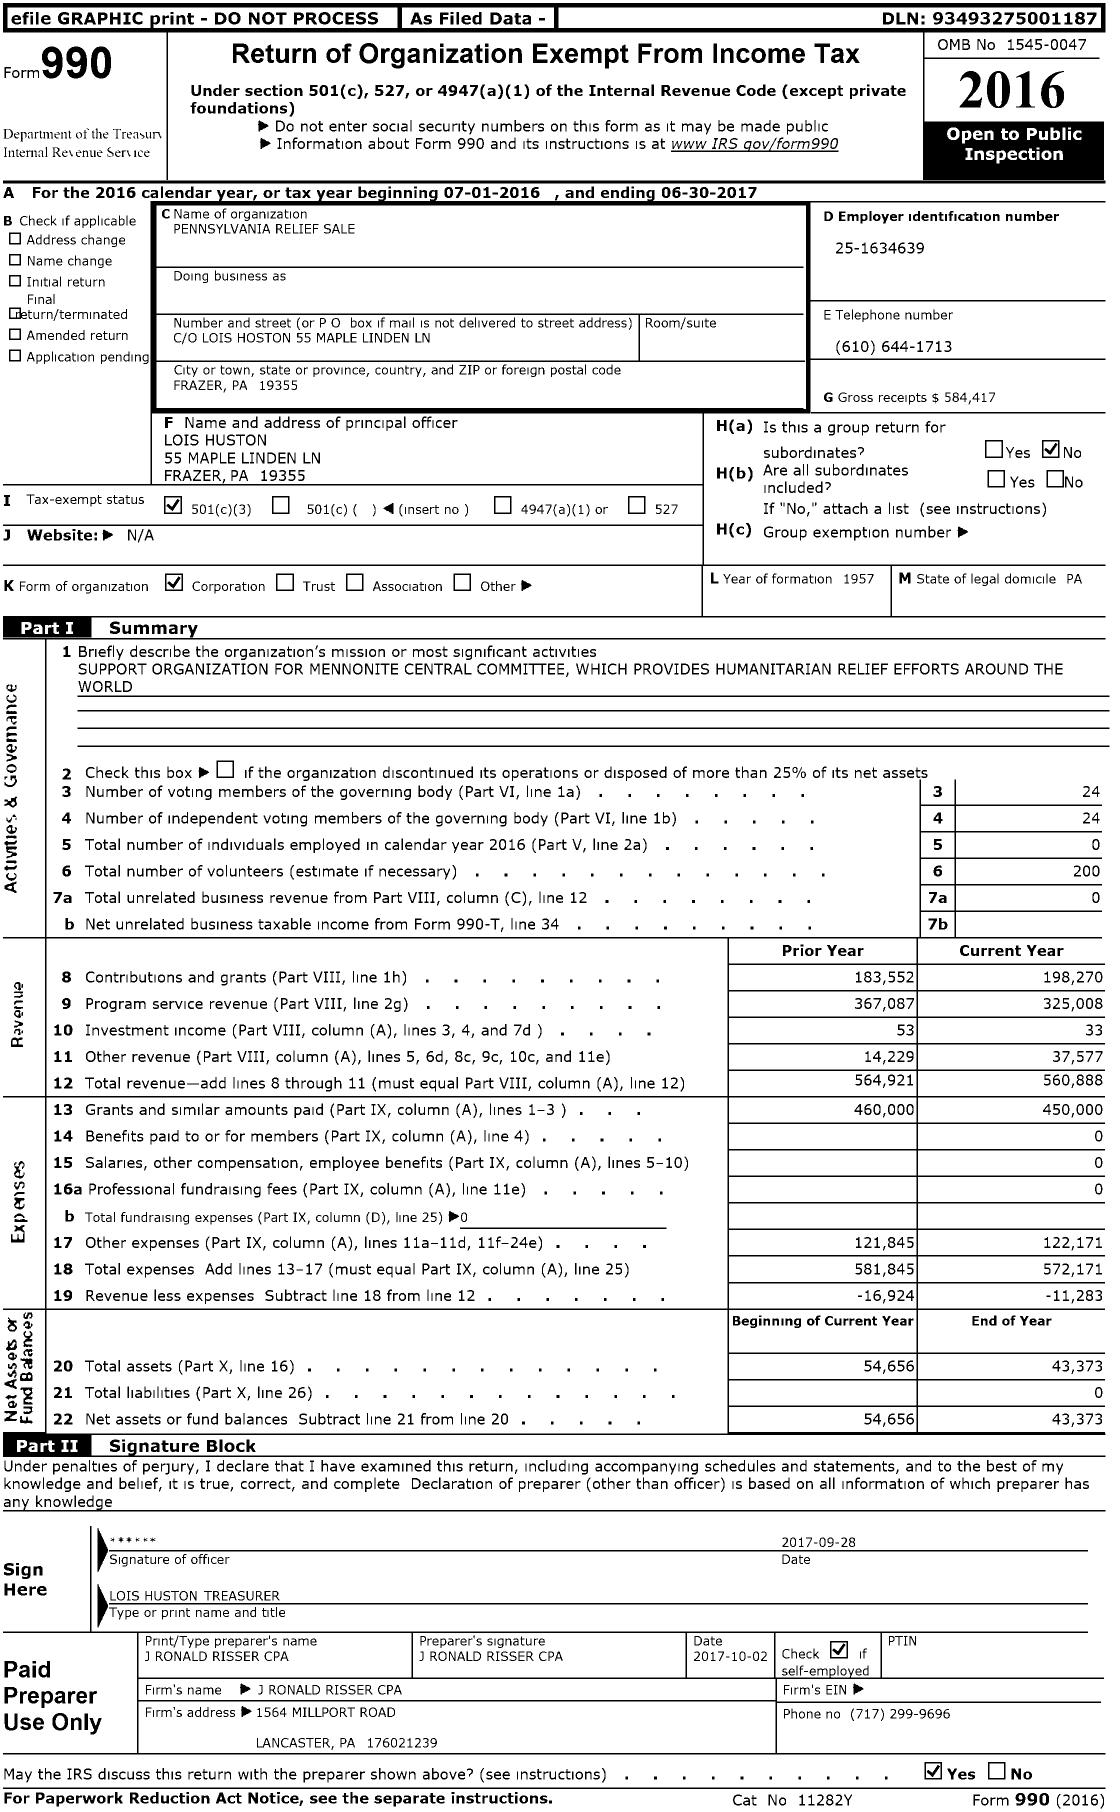 Image of first page of 2016 Form 990 for Pennsylvania Relief Sale